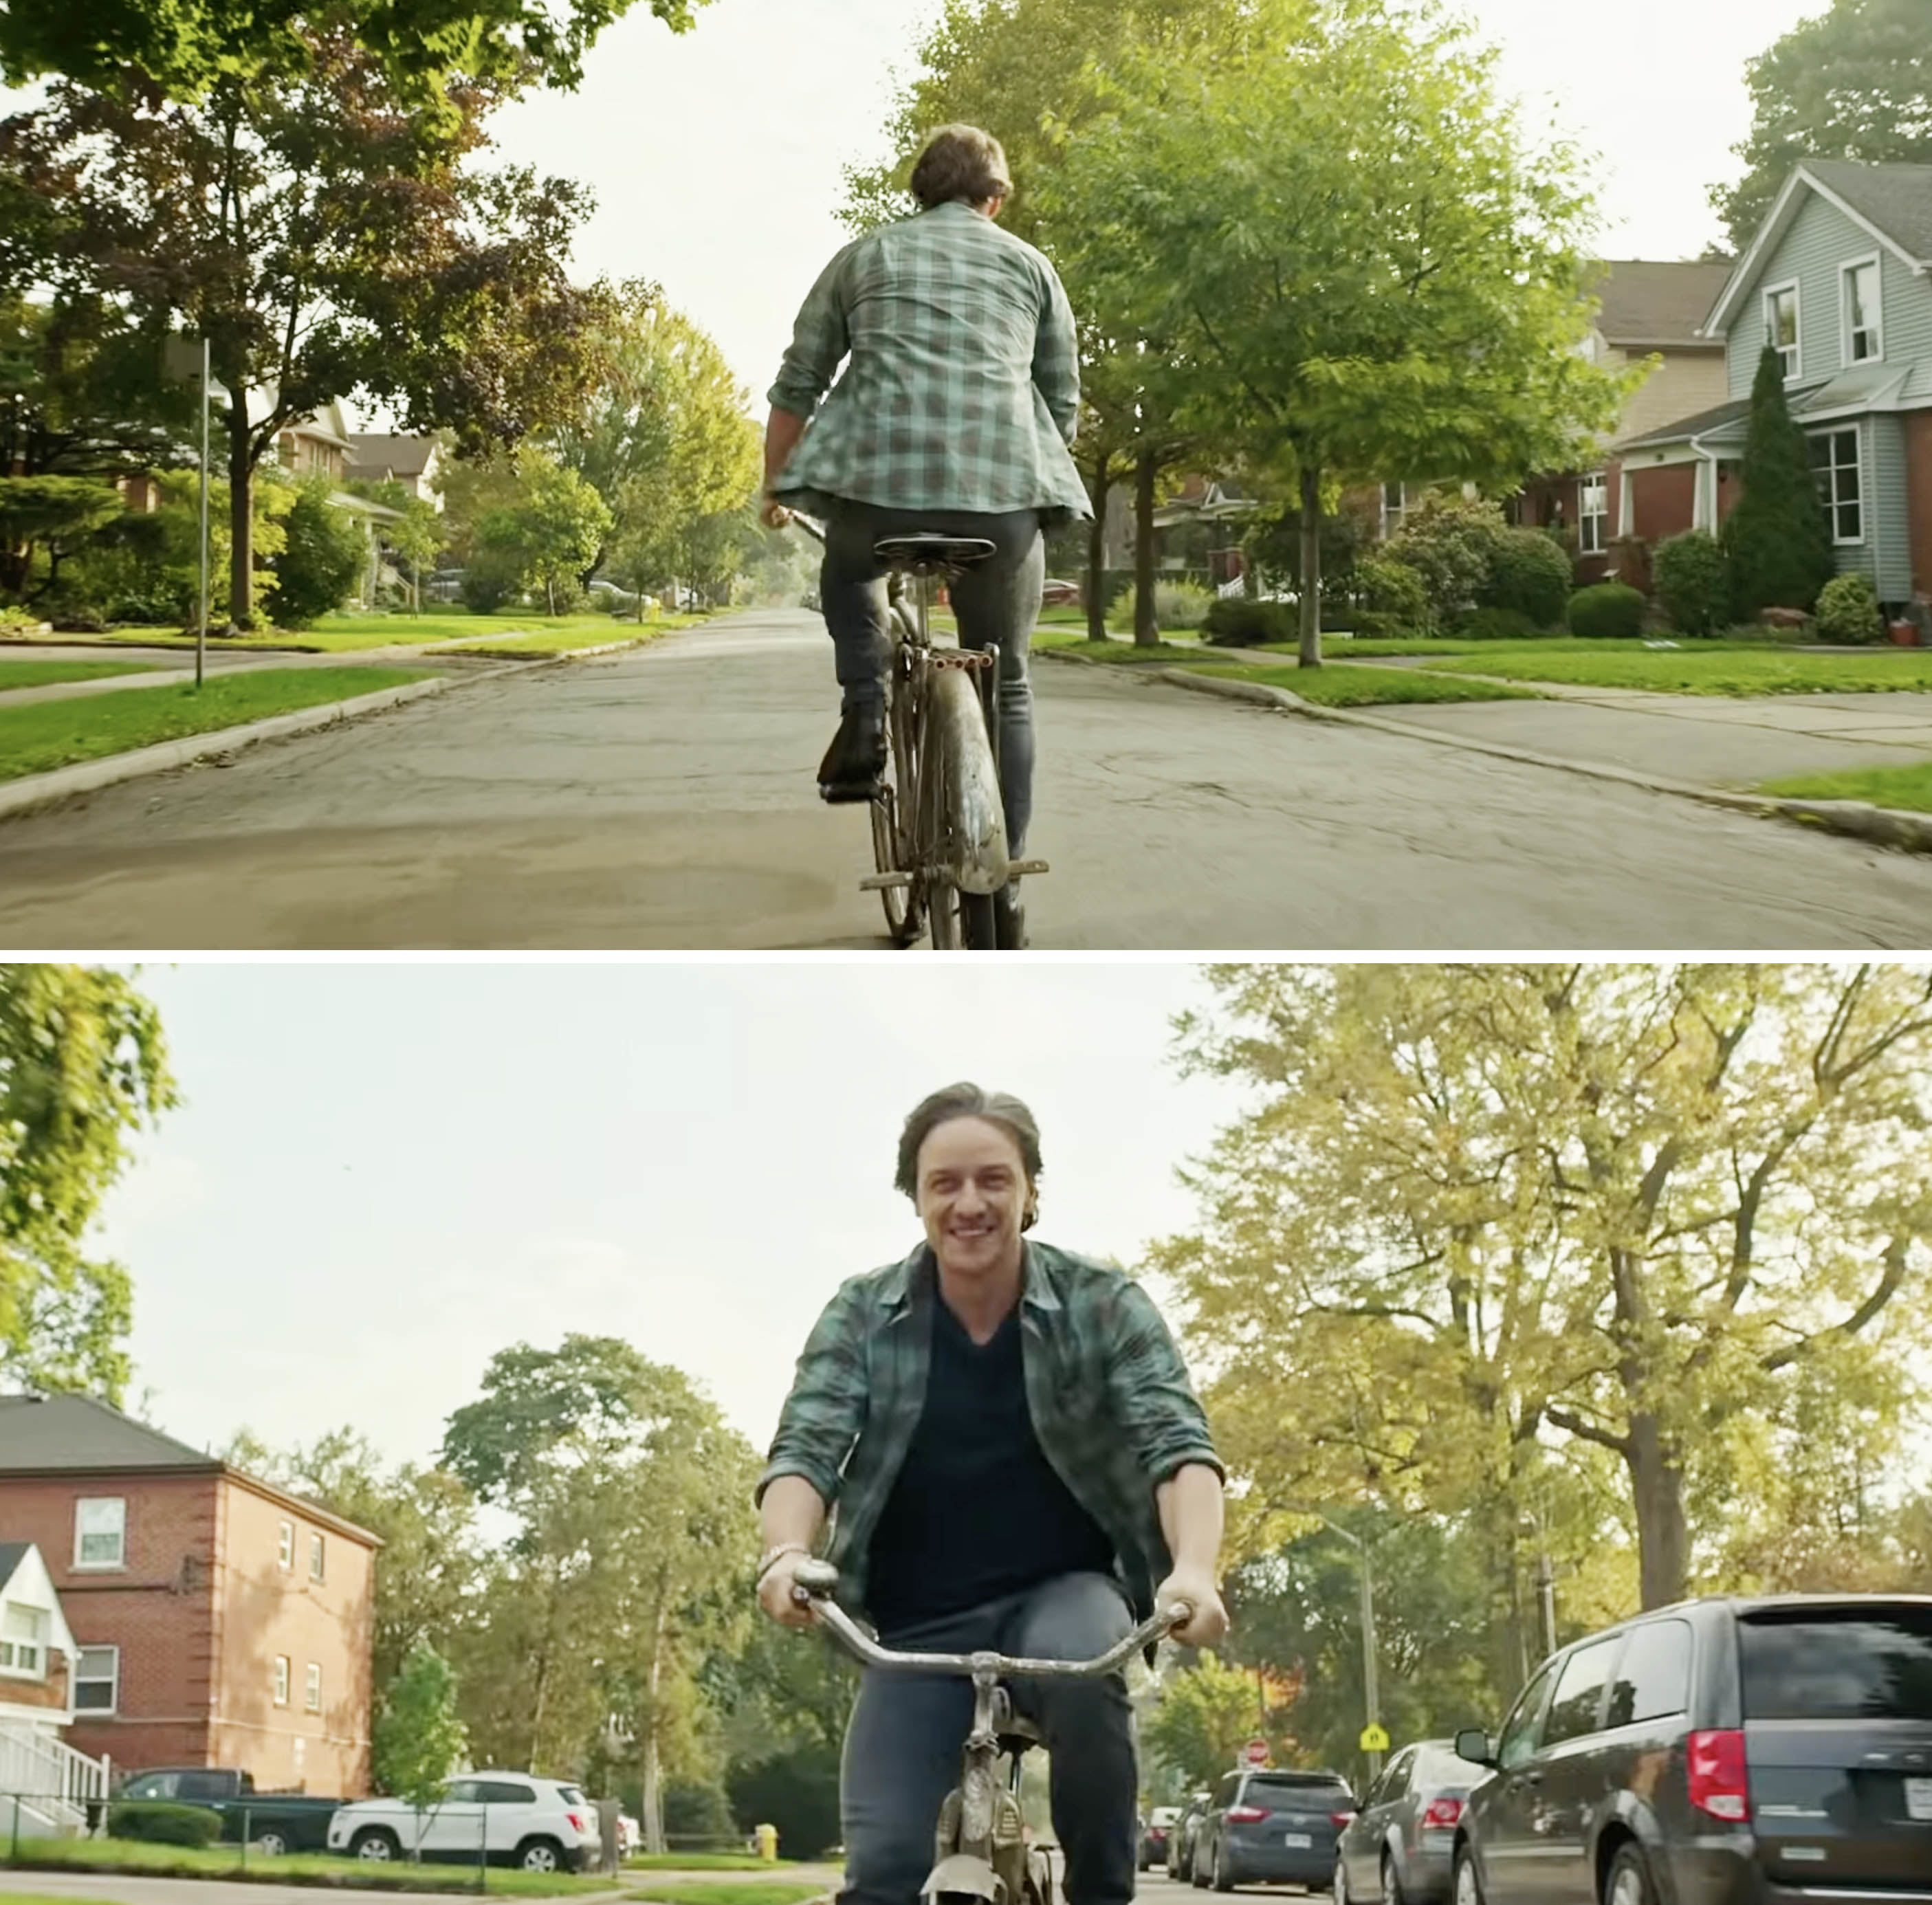 James cycling down the street in a scene from It Chapter Two